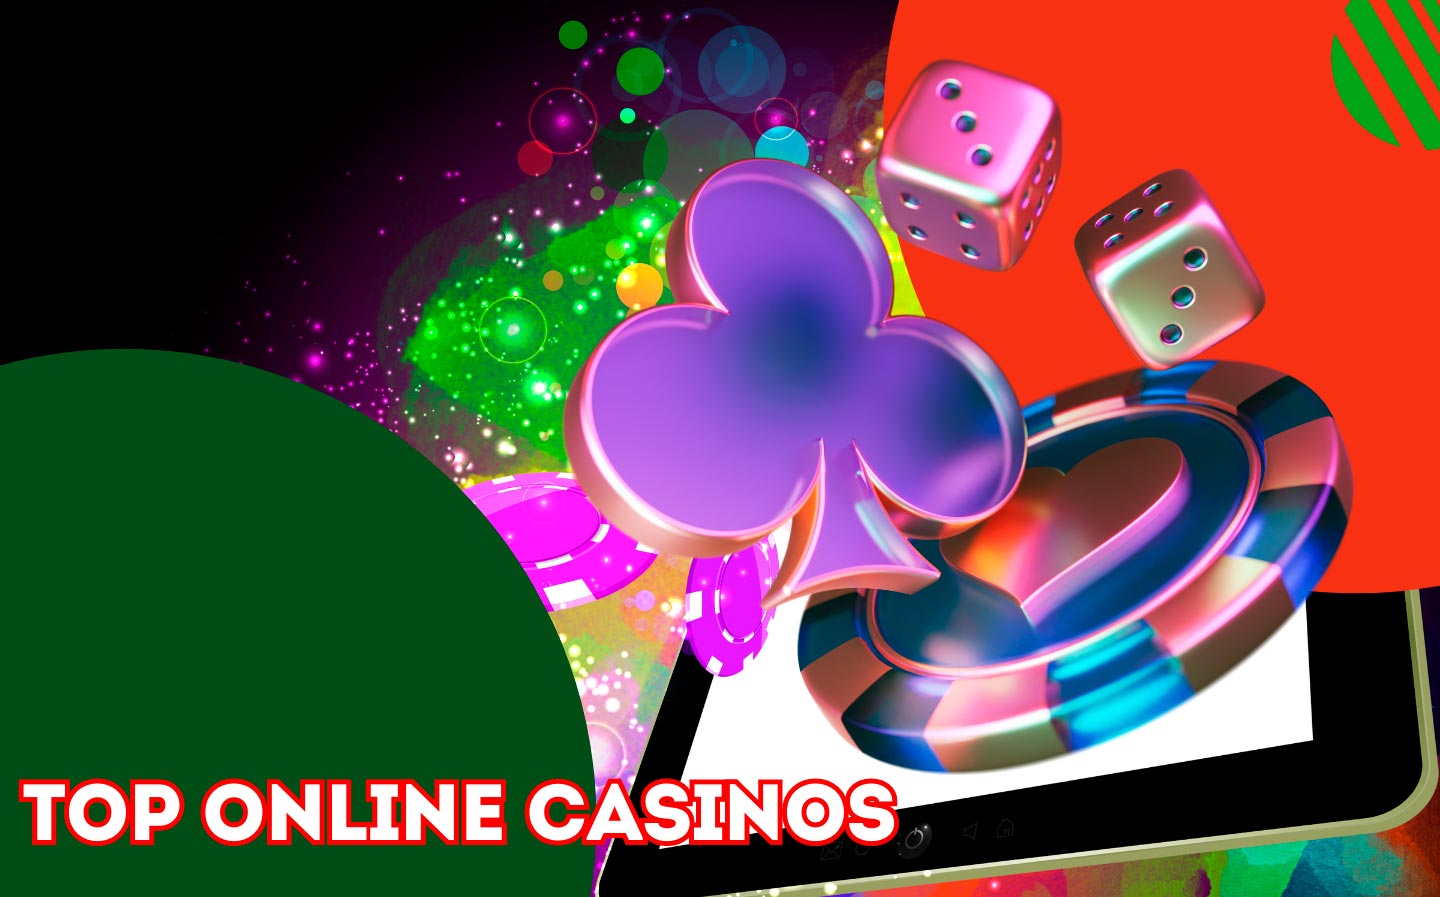 You can play online casino using your smartphone